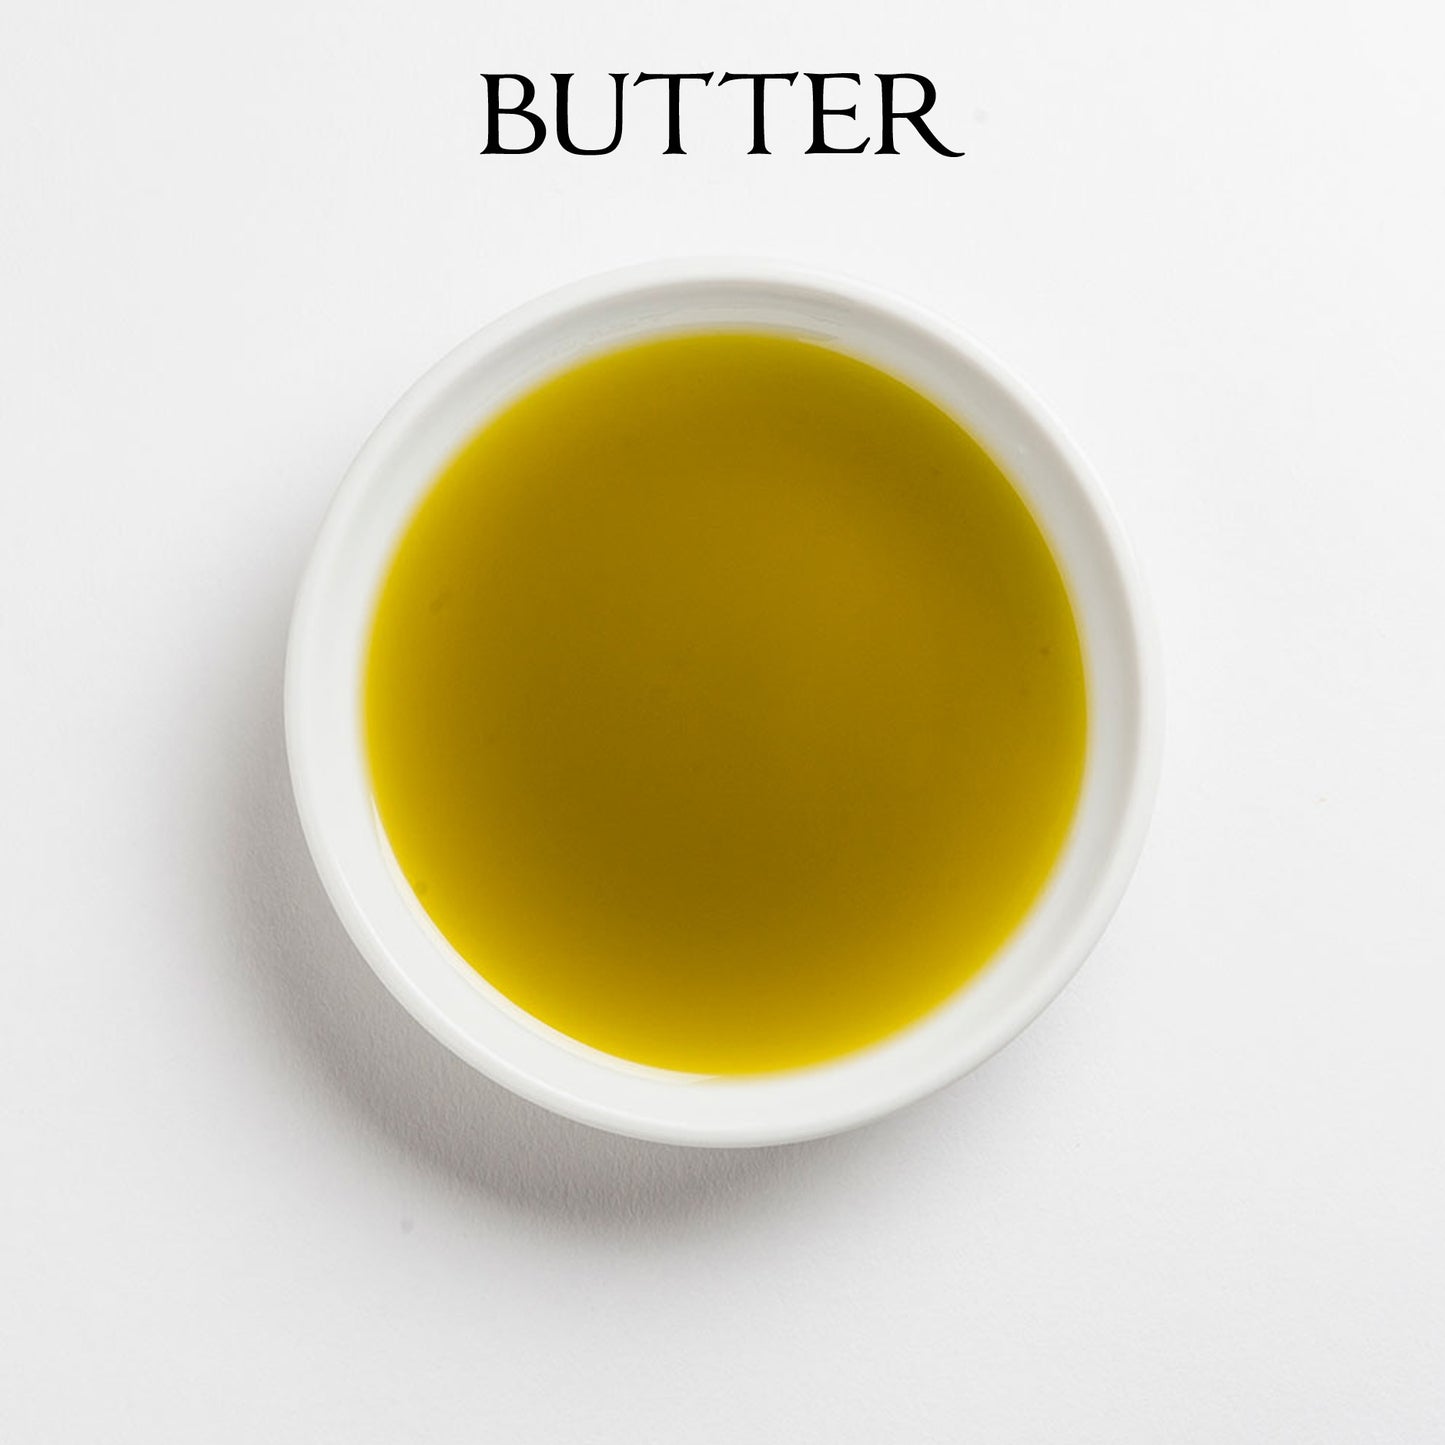 BUTTER Infused Olive Oil - California (NON-DAIRY)